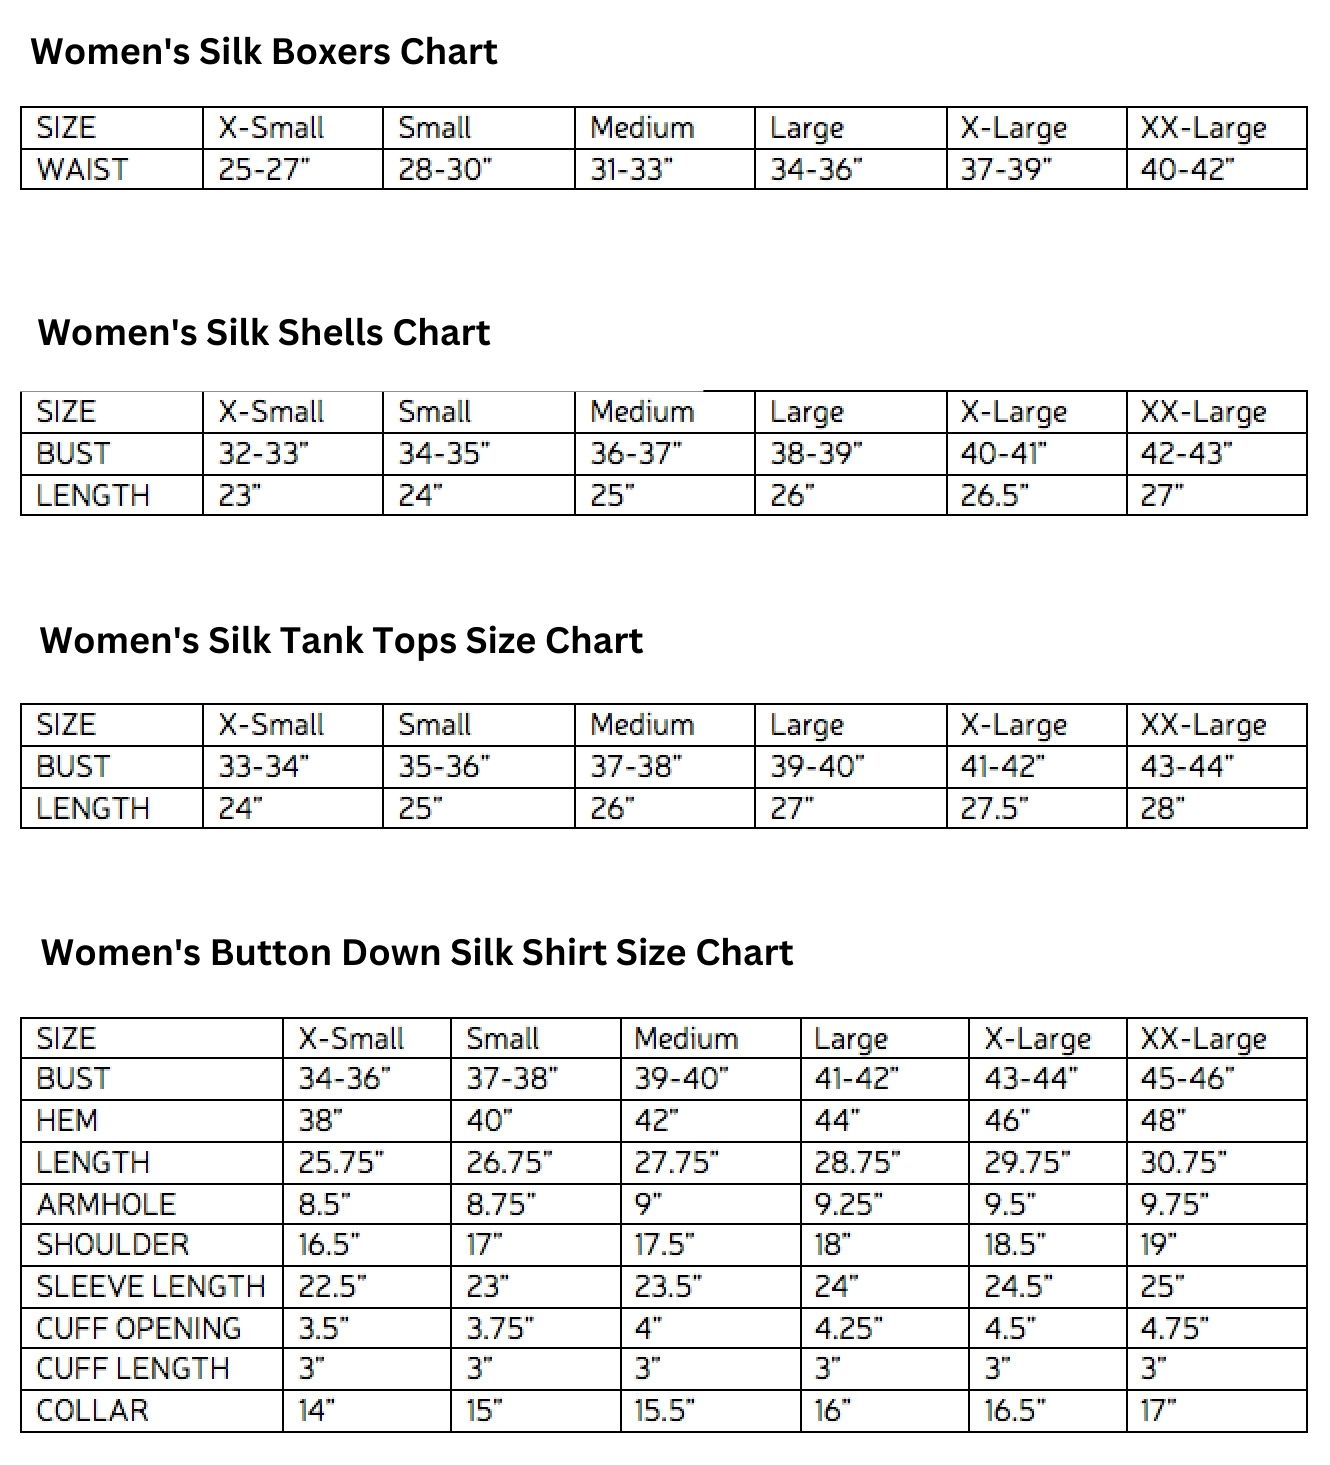 Sizing Charts for Silk Clothing